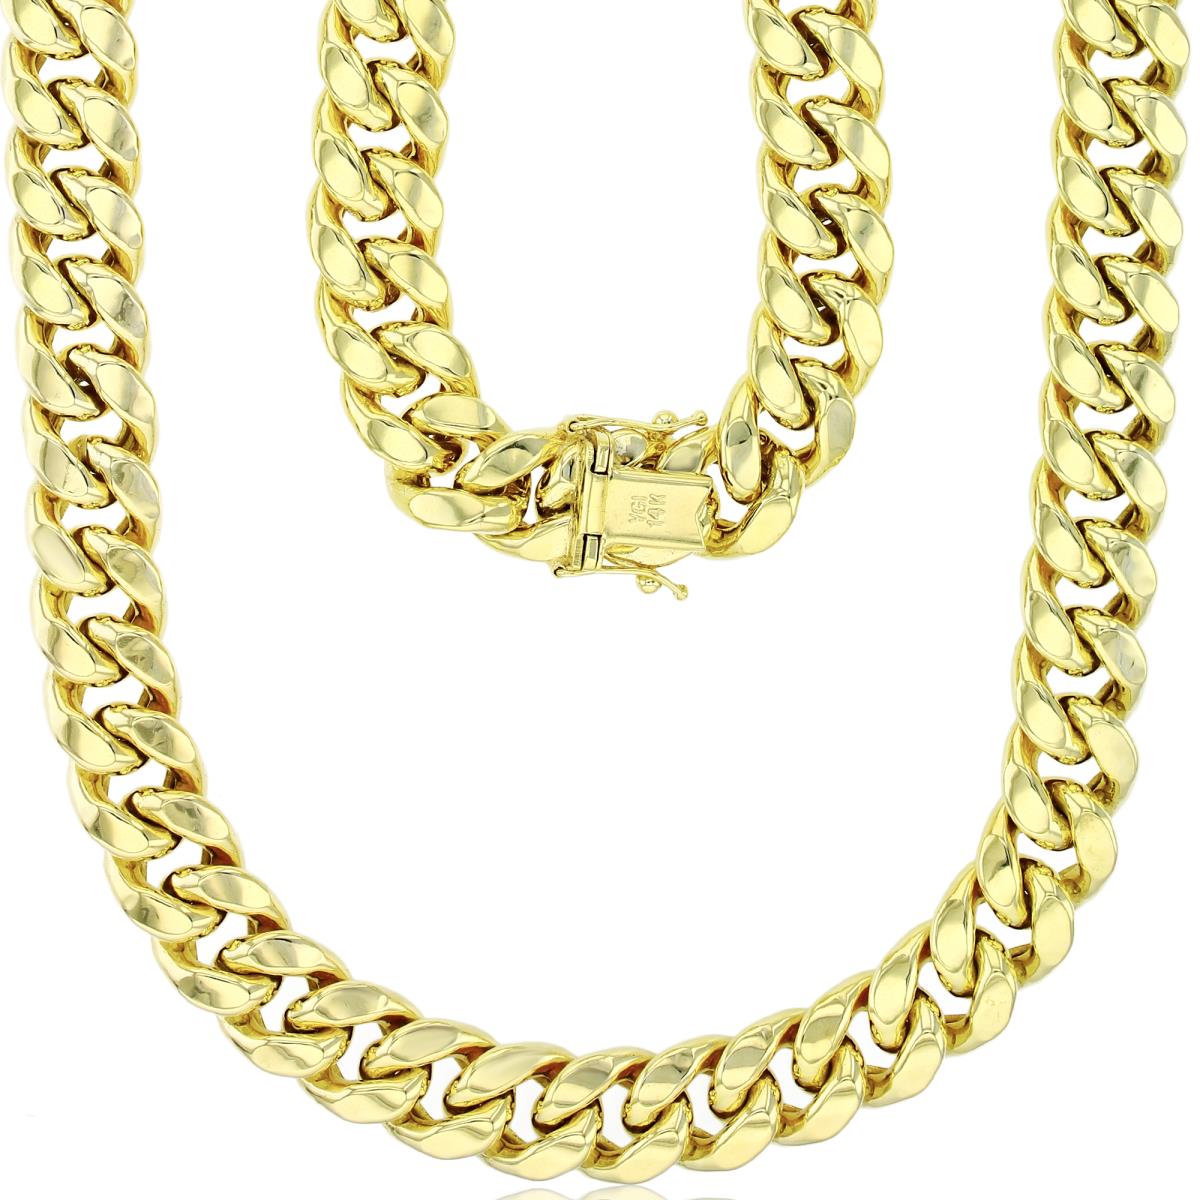 10K Yellow Gold 12mm 8.75" 300 Hollow Miami Cuban Chain with Box Lock